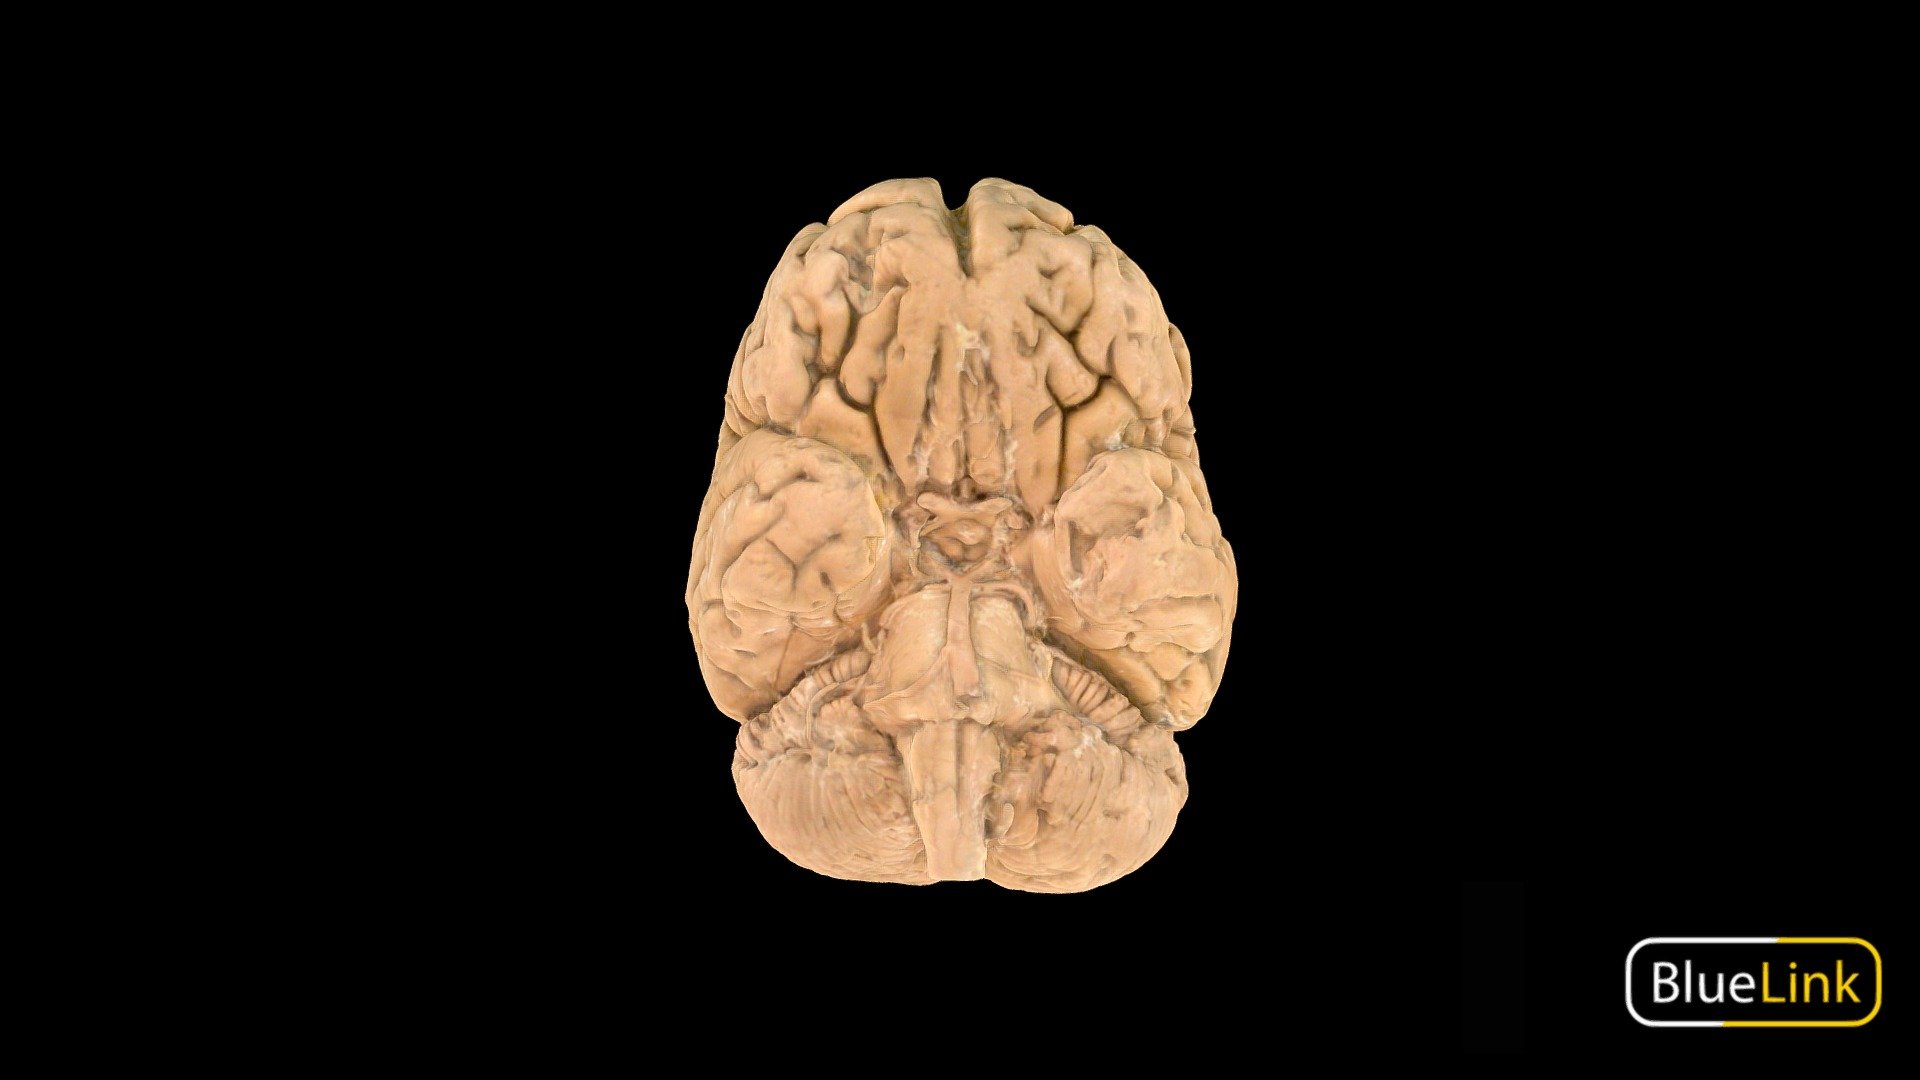 3D scan of the brain with section cut out to display the hippocampus

Captured with Einscan Pro

Captured and edited by: Madelyn Murphy, Cristina Prall

Copyright2019 BK Alsup &amp; GM Fox - Brain - Inferior Surface CN & Arteries, Labeled - 3D model by Bluelink Anatomy - University of Michigan (@bluelinkanatomy) 3d model